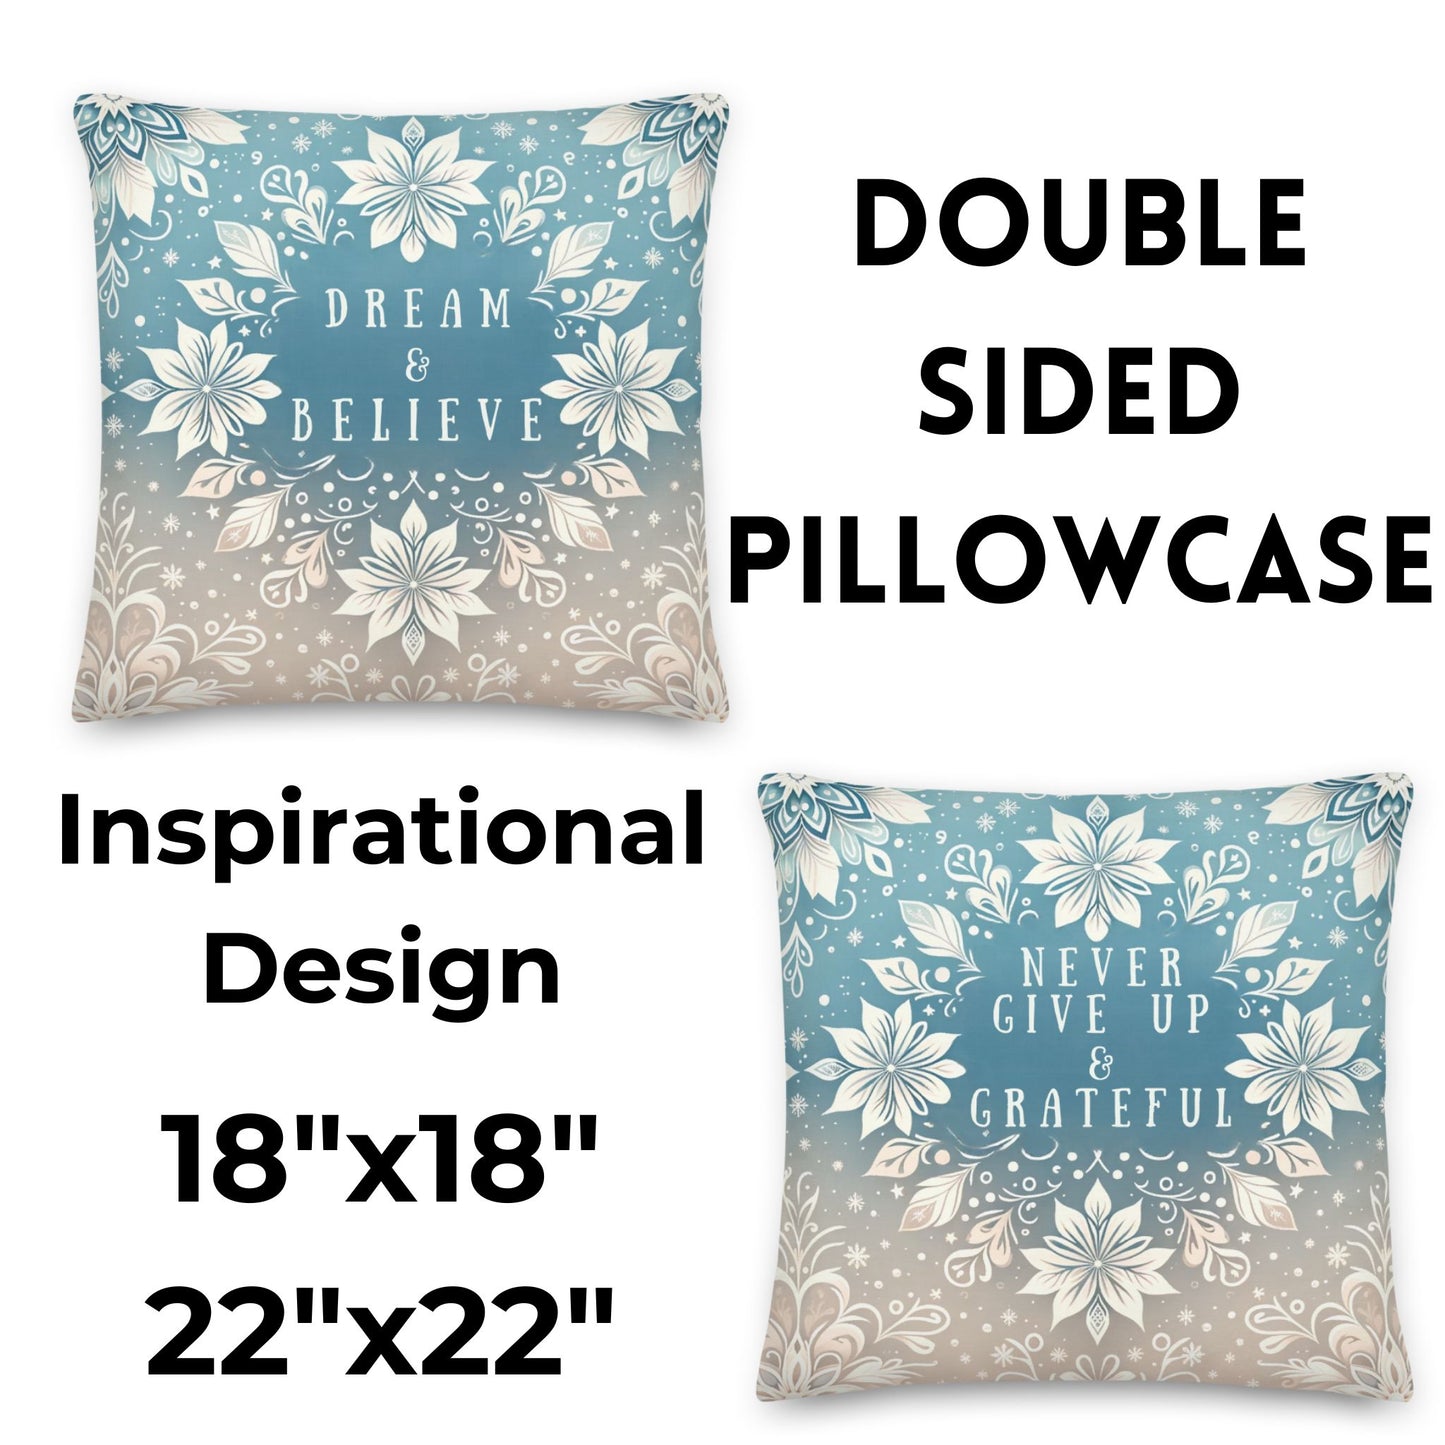 Double-Sided Inspirational Pillow Case - 'Never Give Up & Grateful' and 'Dream & Believe' Designs - 18x18 & 22x22